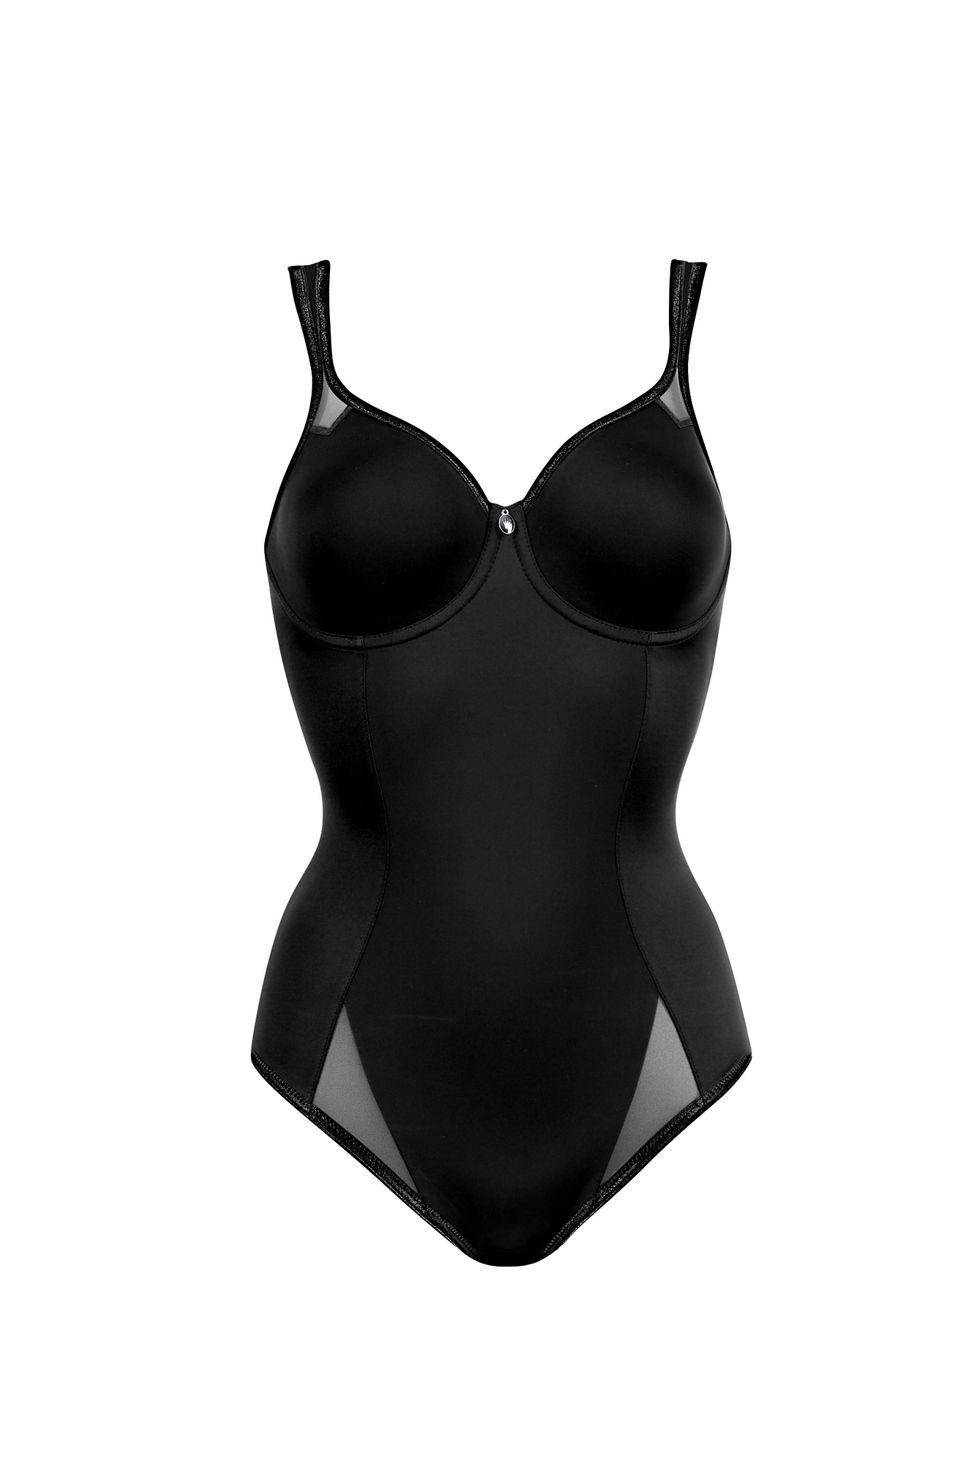 White, Personal protective equipment, Black, Undergarment, Swimwear, Lingerie top, One-piece swimsuit, Lingerie, Leather, Brassiere, 